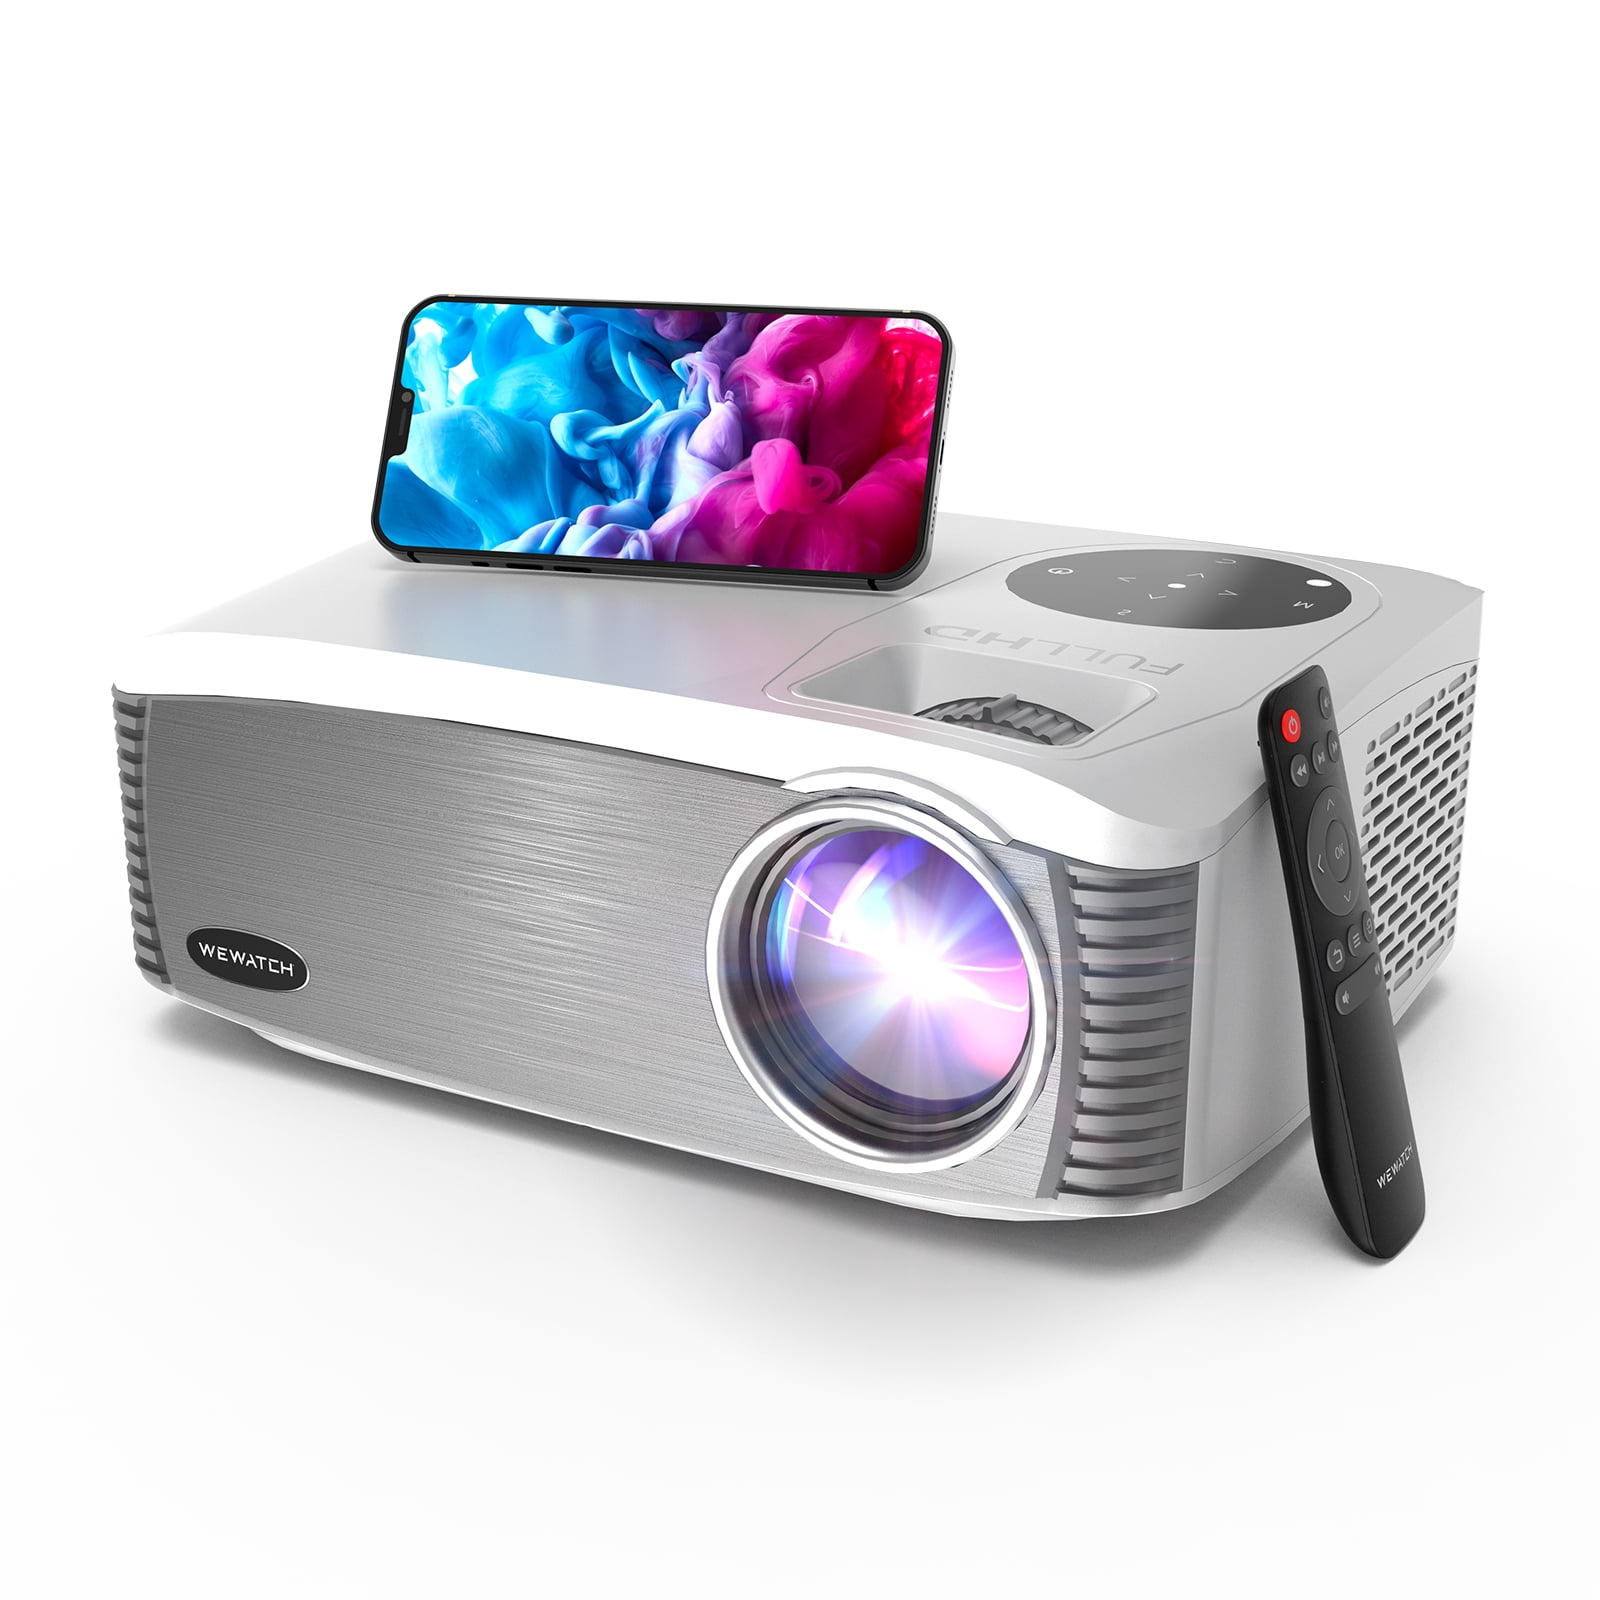 WEWATCH 20000 Lumens 500 ANSI Projector Native 1080P WiFi Projector w/ Bluetooth 5.0 Zoom, Full HD Gaming Home Theater Projector Compatible w/ TV Sticks/HDMIVGA/USB - Walmart.com